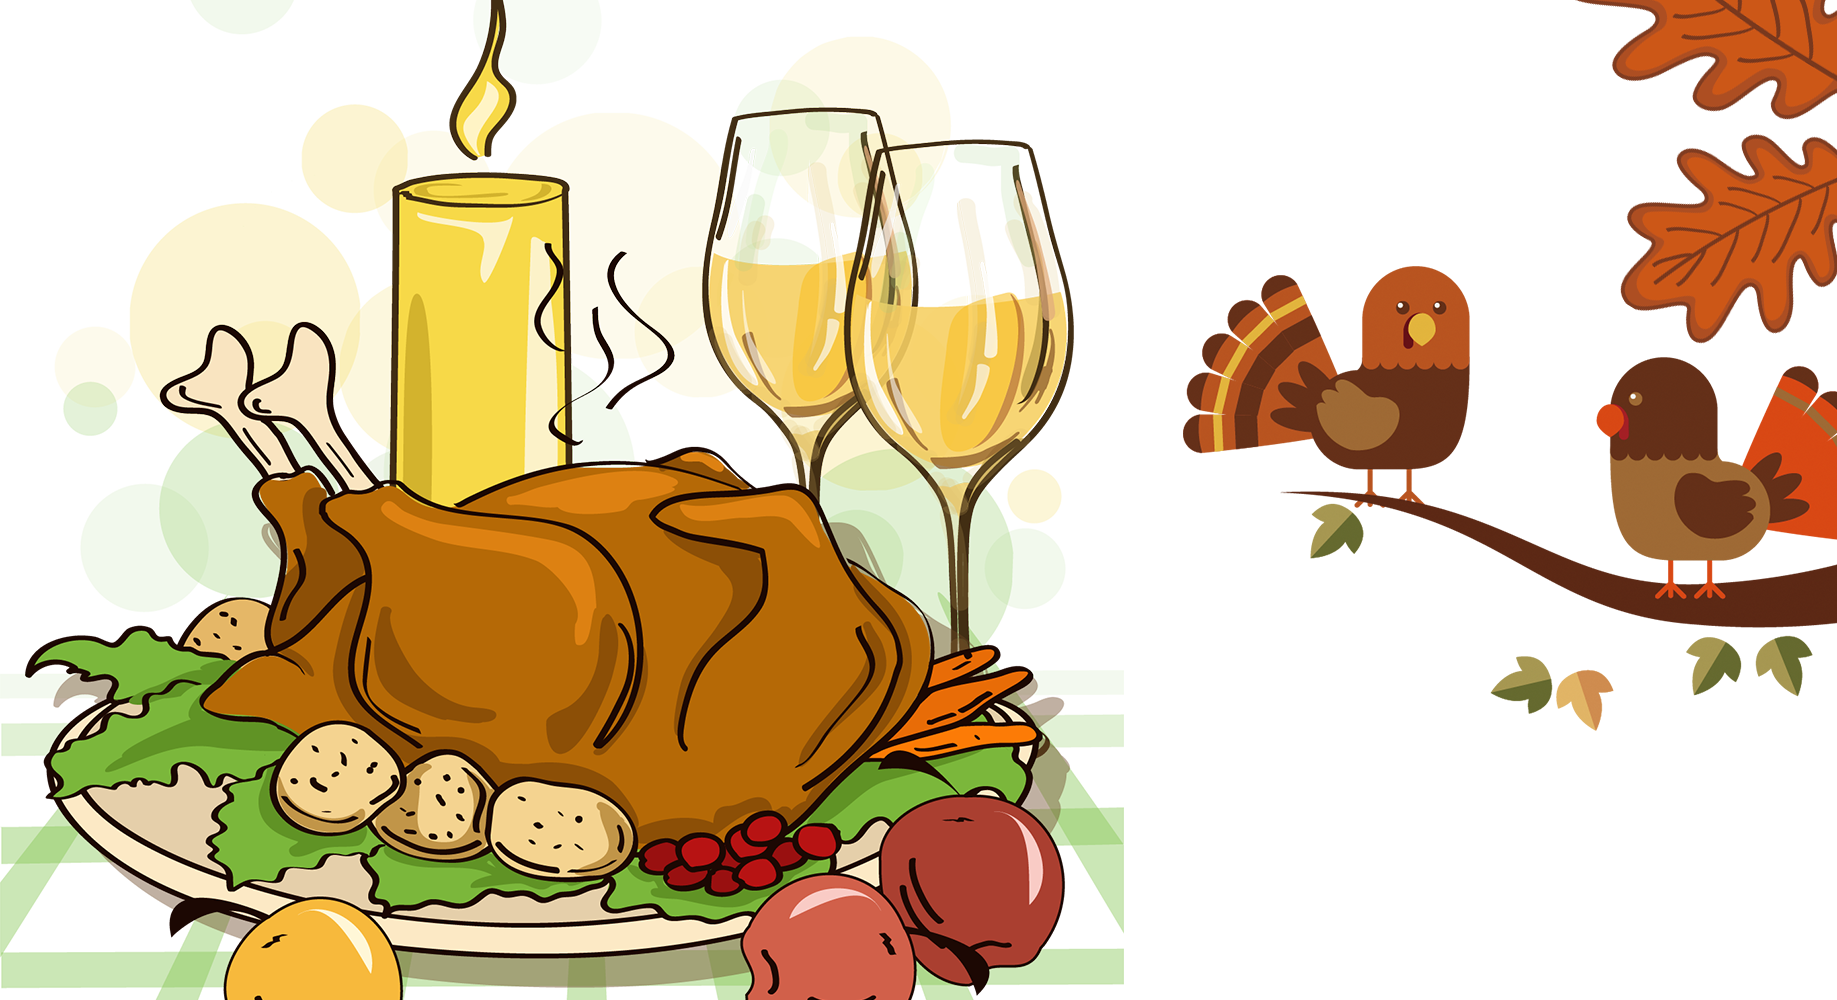 Cartoon Picture Of Thanksgiving Dinner - Conceptual Marketing ...